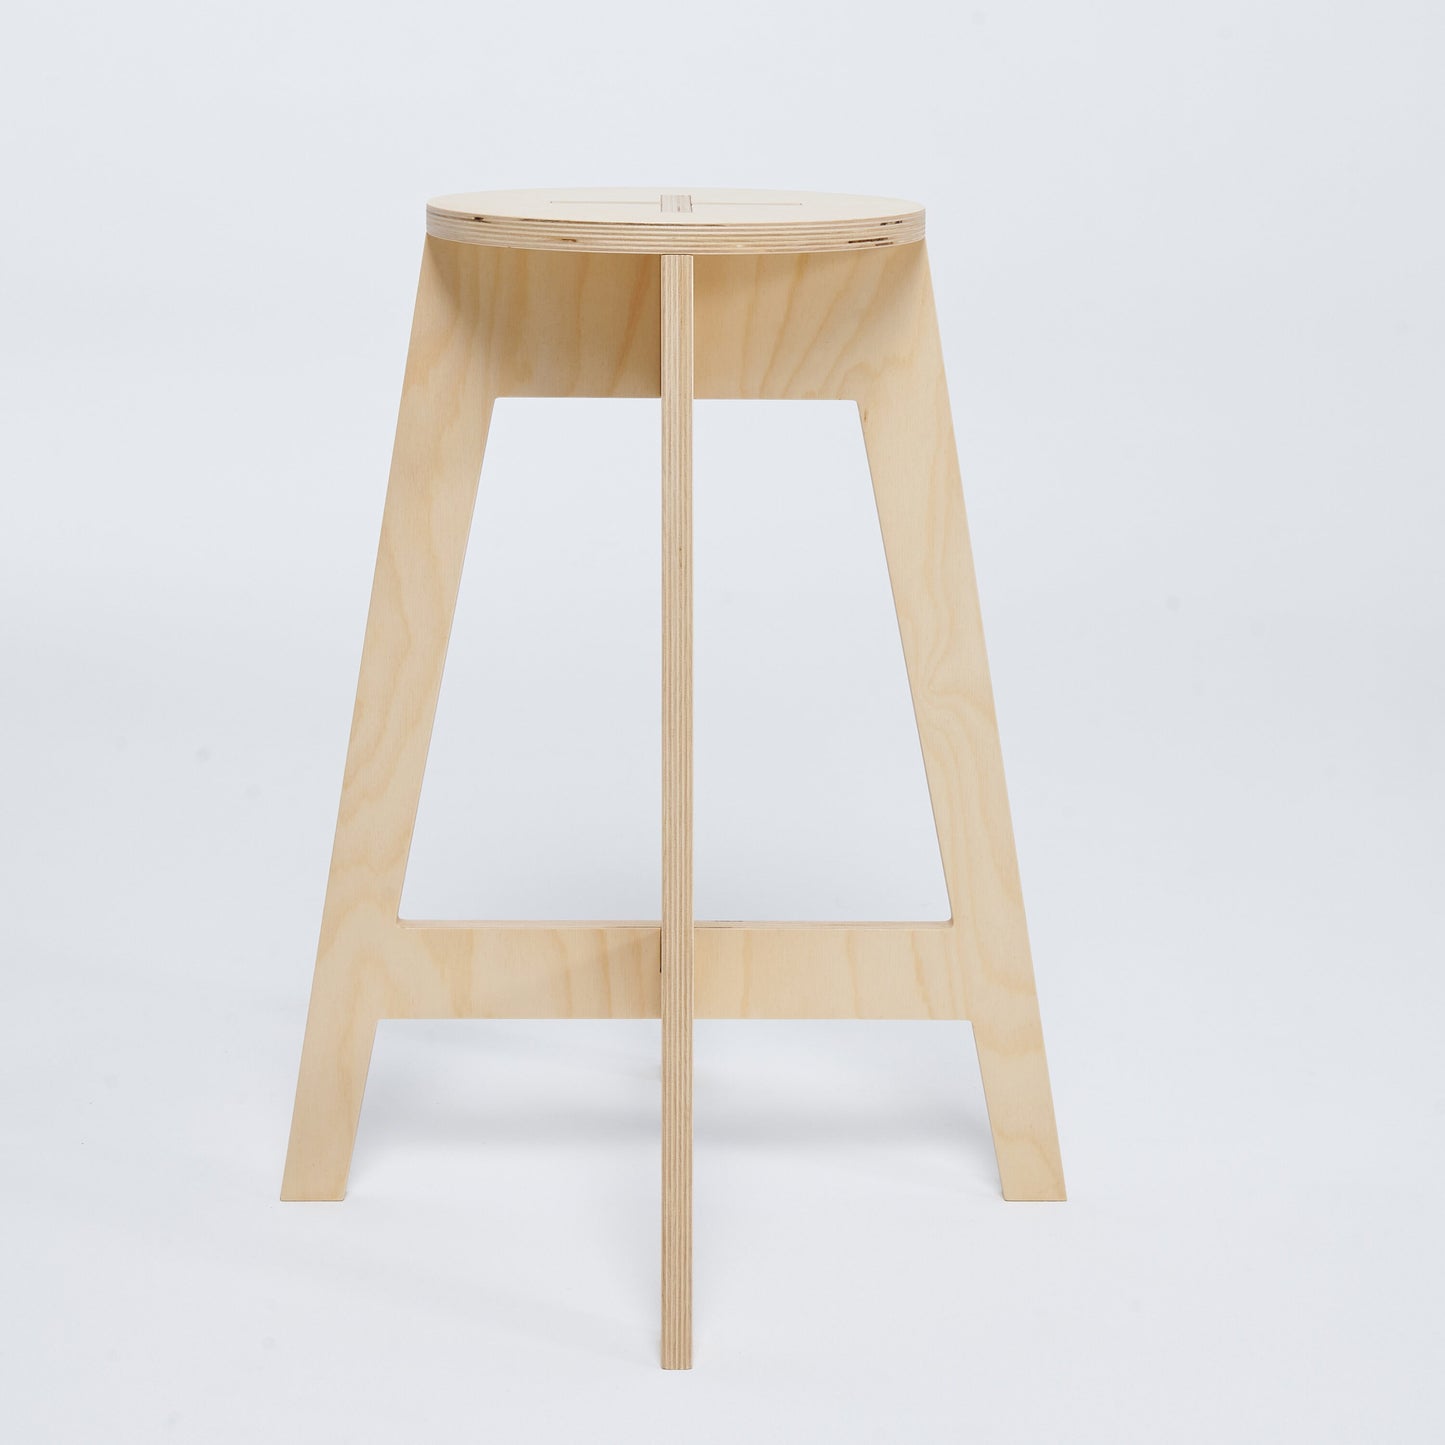 Bar stool counter high 63cm (24 3/4"), made of plywood, great for craft fairs, art studio, workshop, office or kitchen